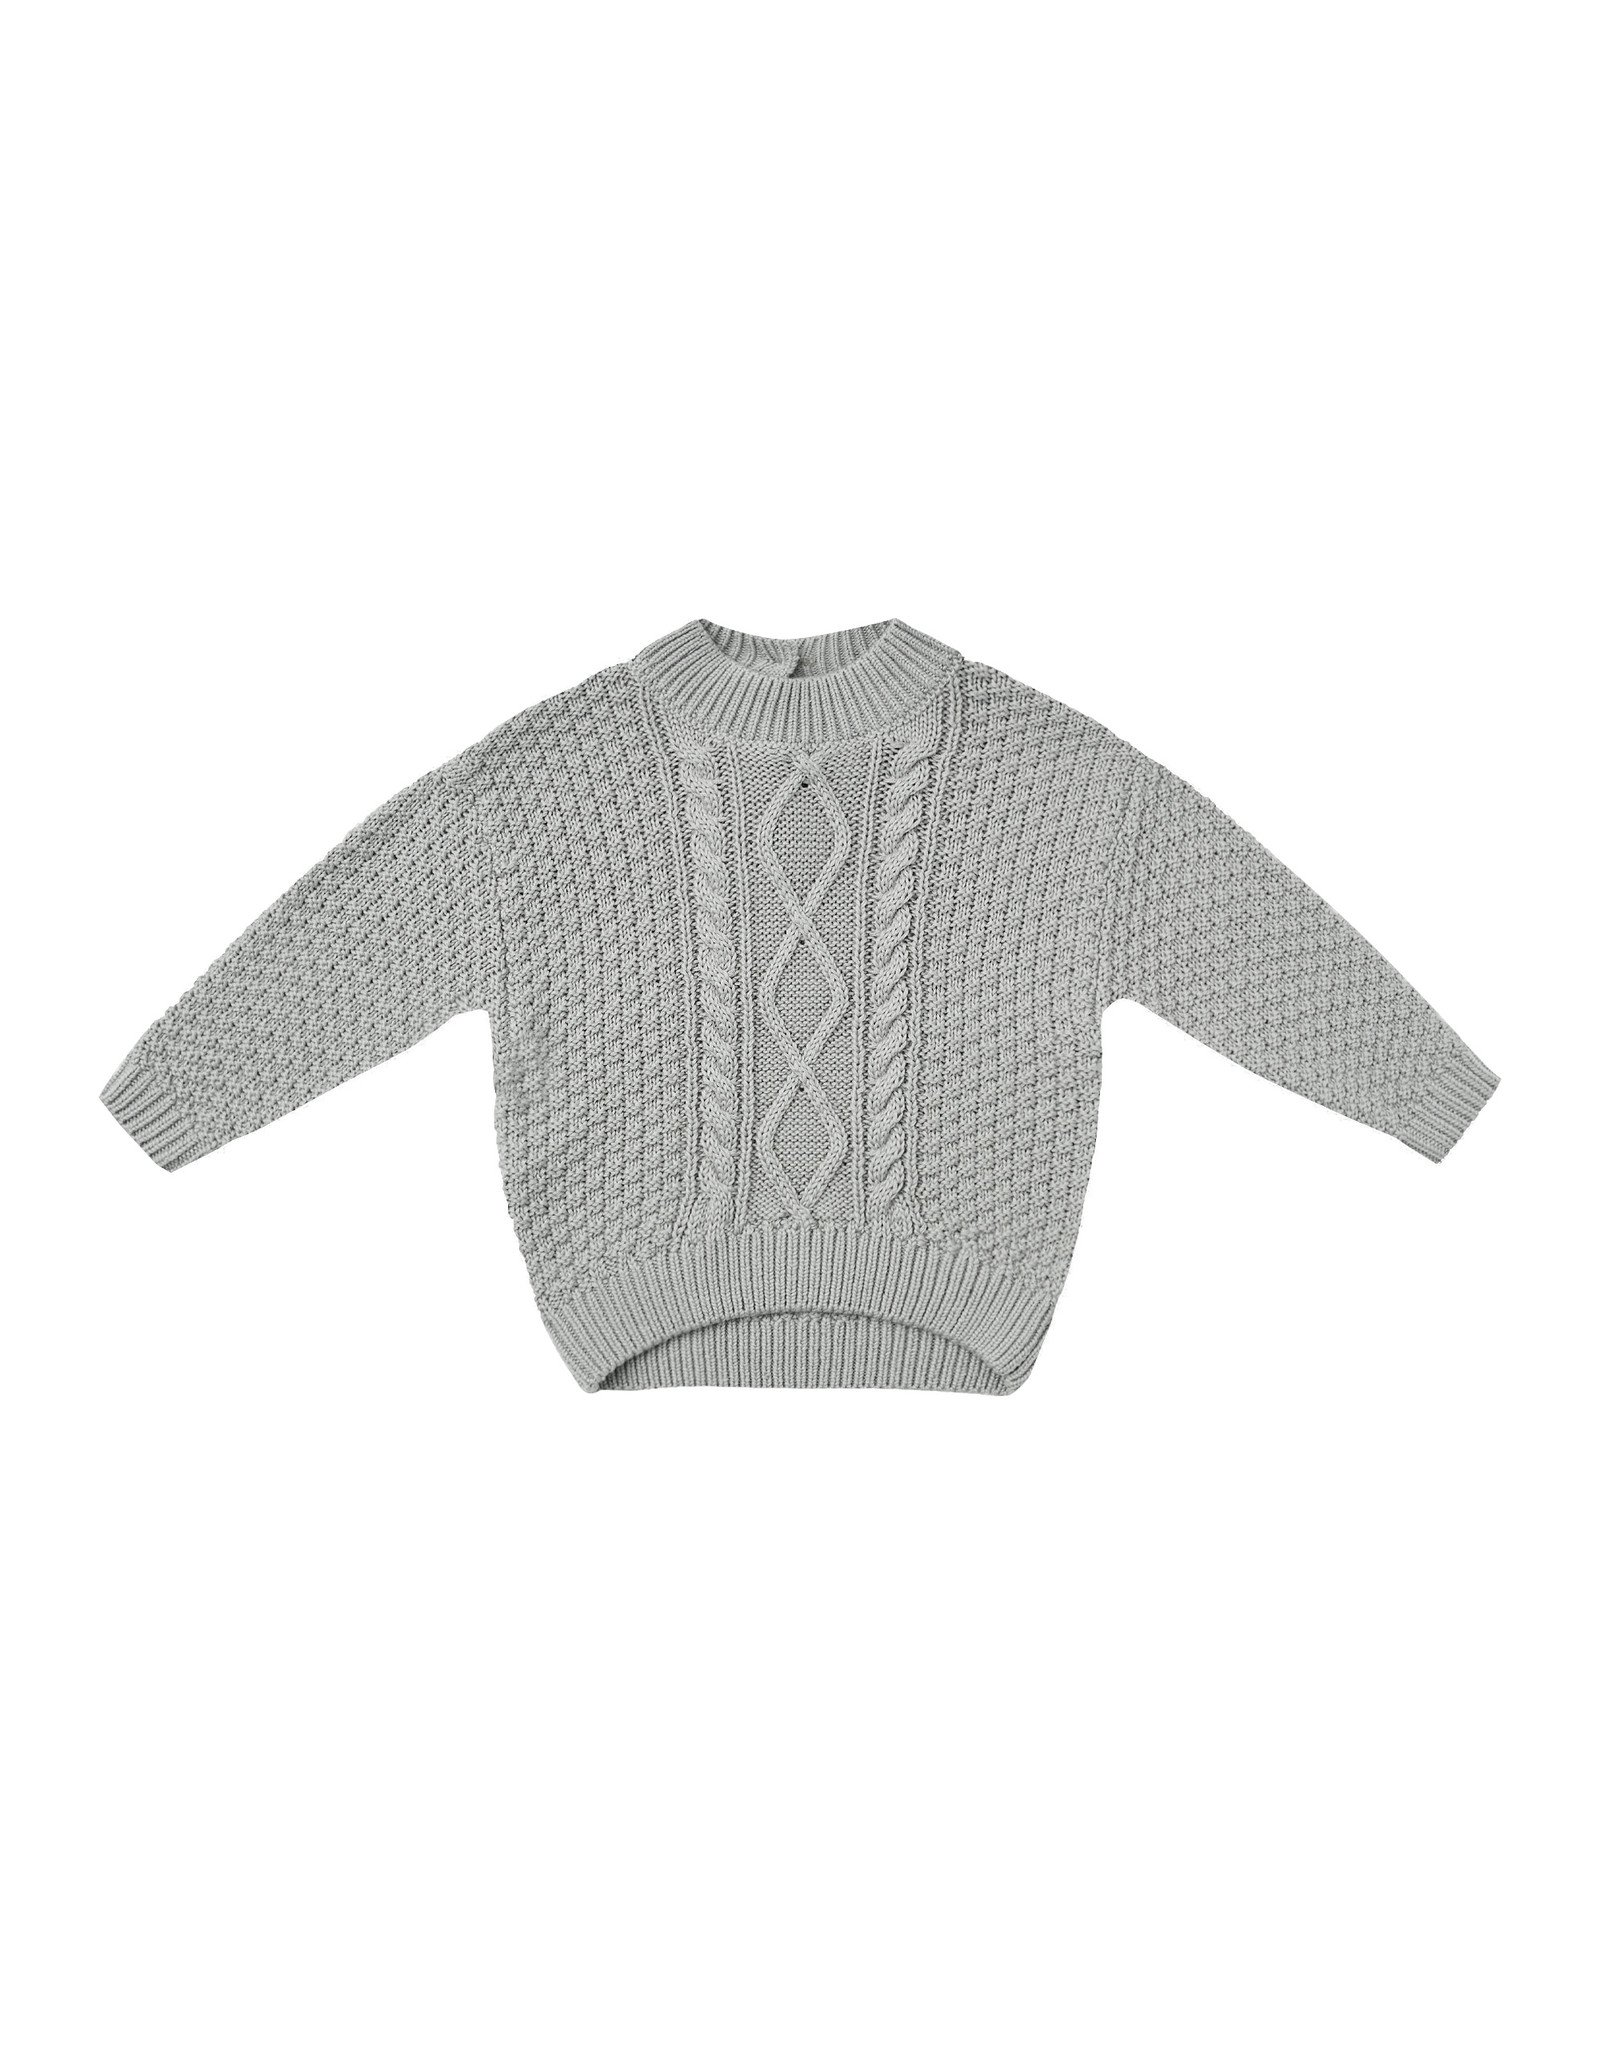 Quincy Mae Cable Knit Sweater